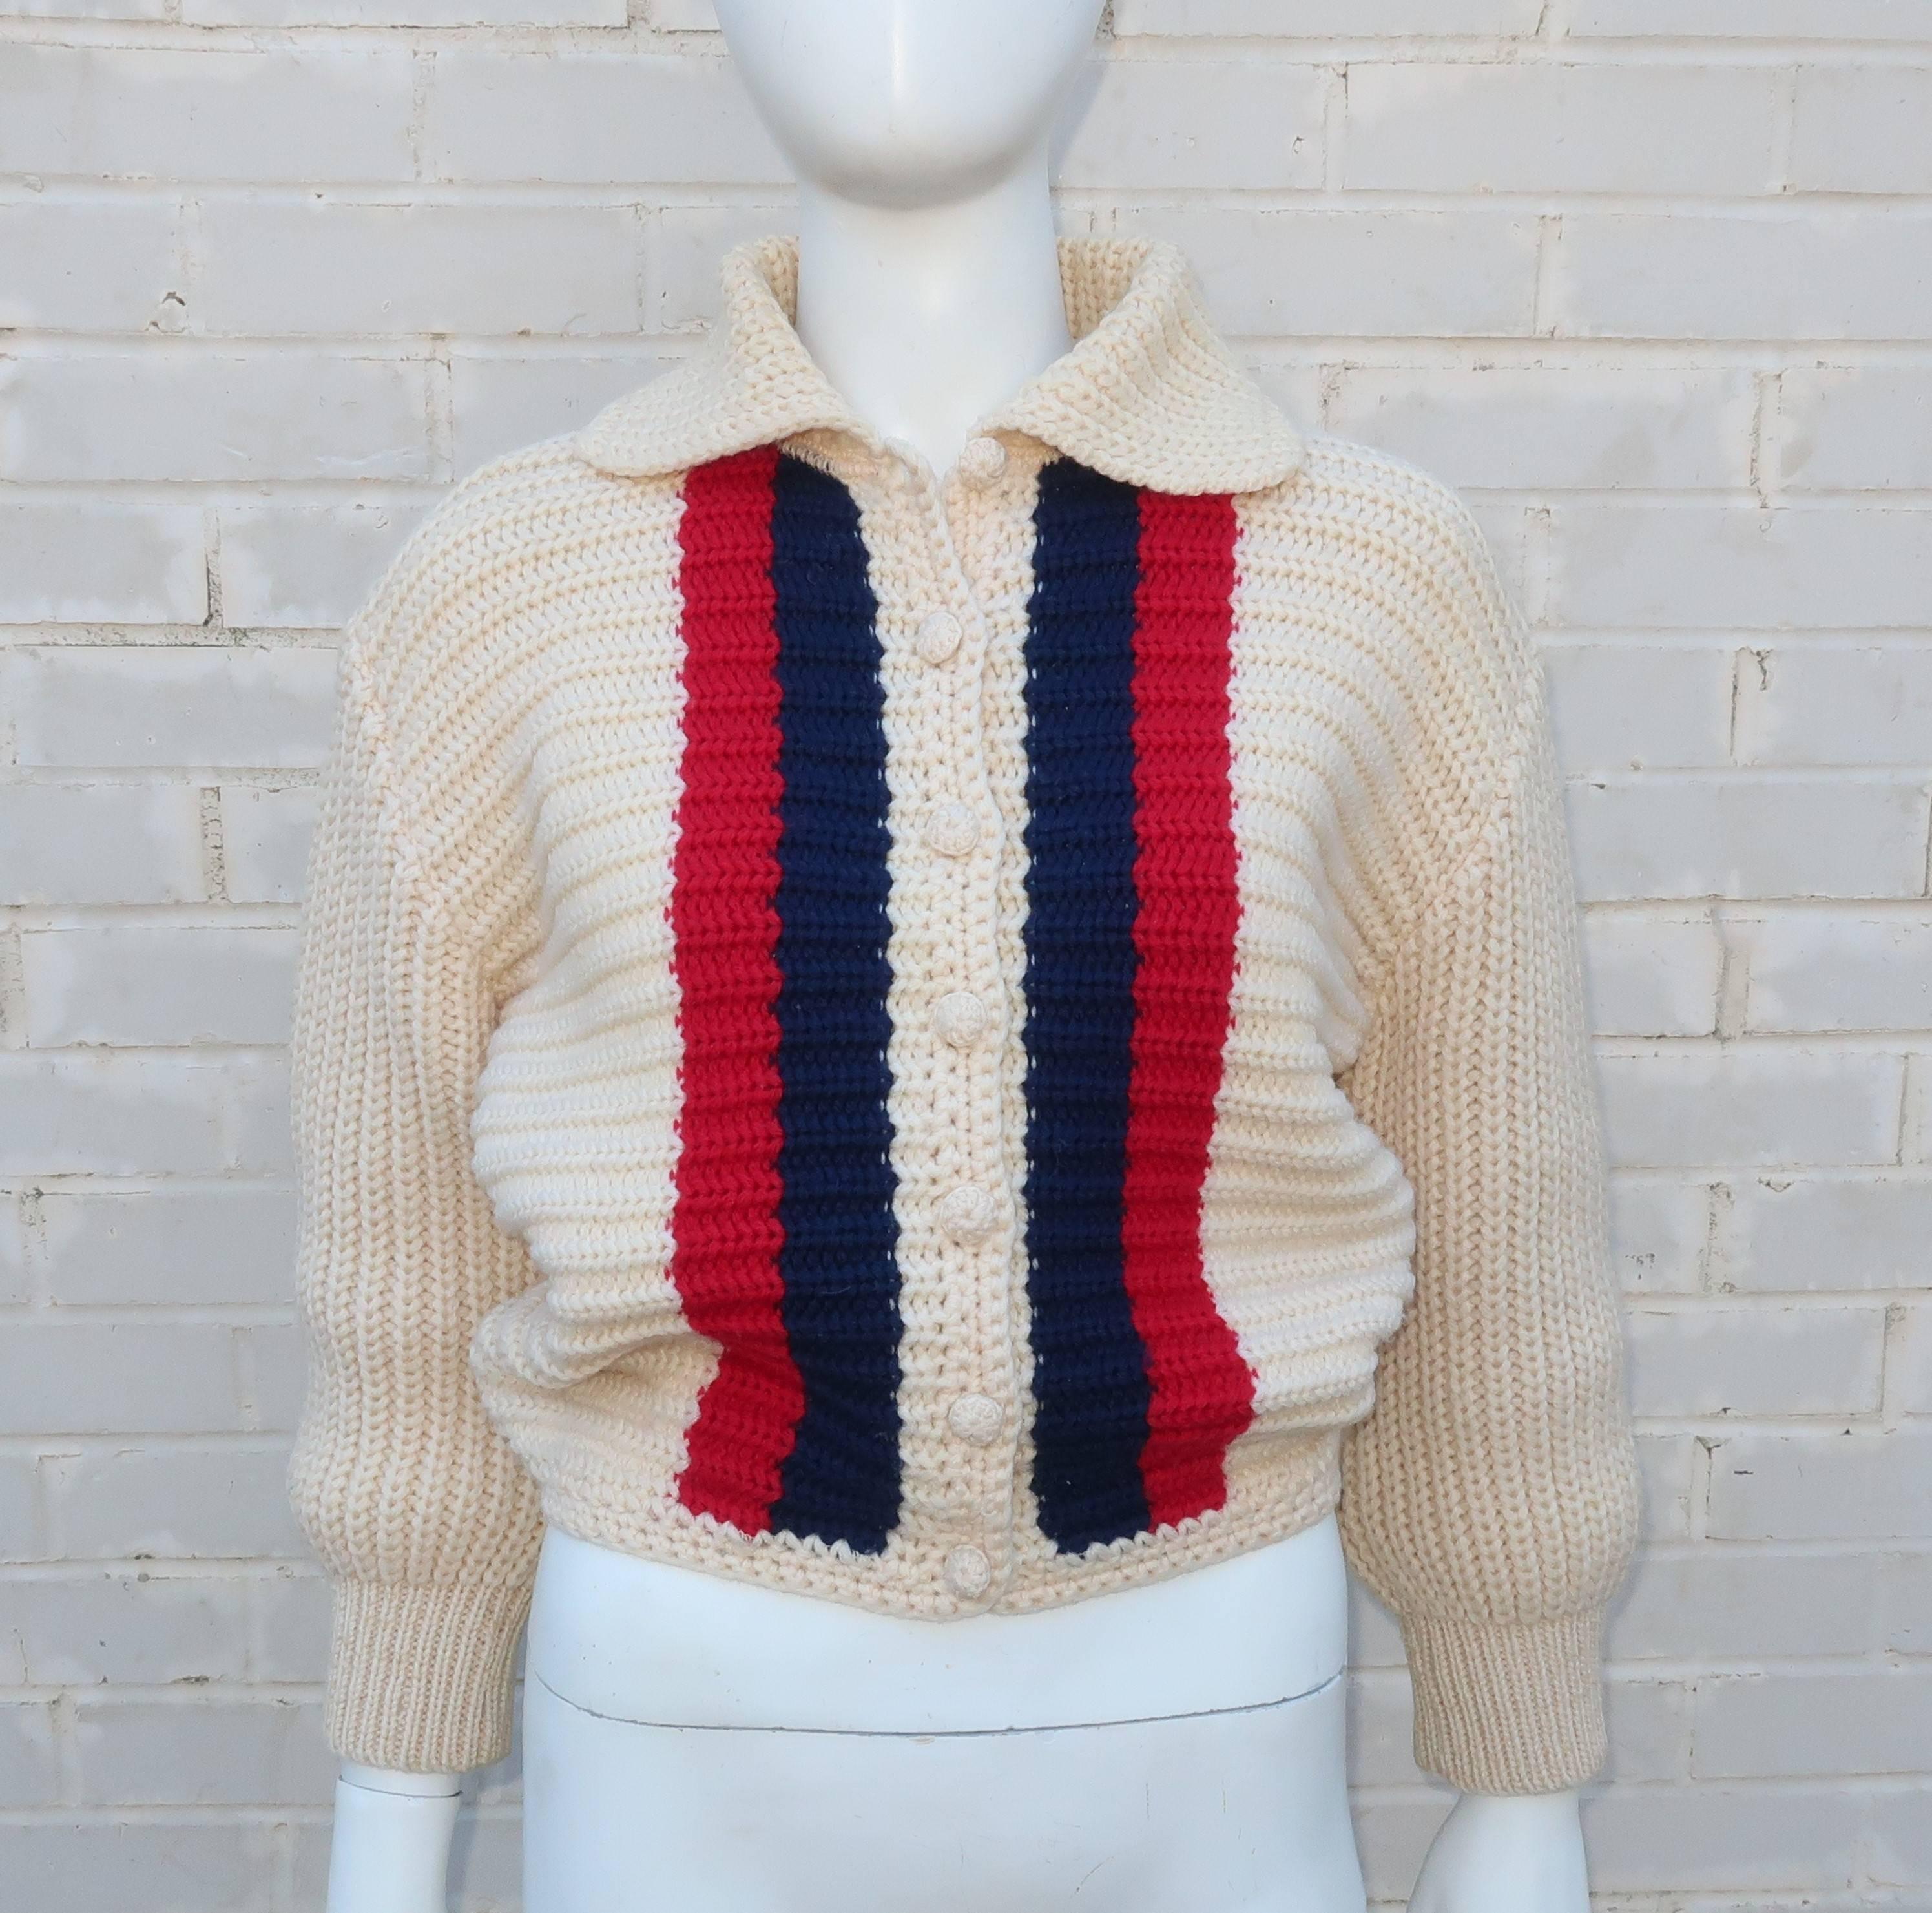 This adorable 1950’s sporty cardigan sweater is aptly named ‘Bulkies’ by LeRoy Knitwear.  The wool sweater is hand knit with a cropped batwing style silhouette in an off-white with a sporty blue and red stripe.  The sweater buttons up the front with